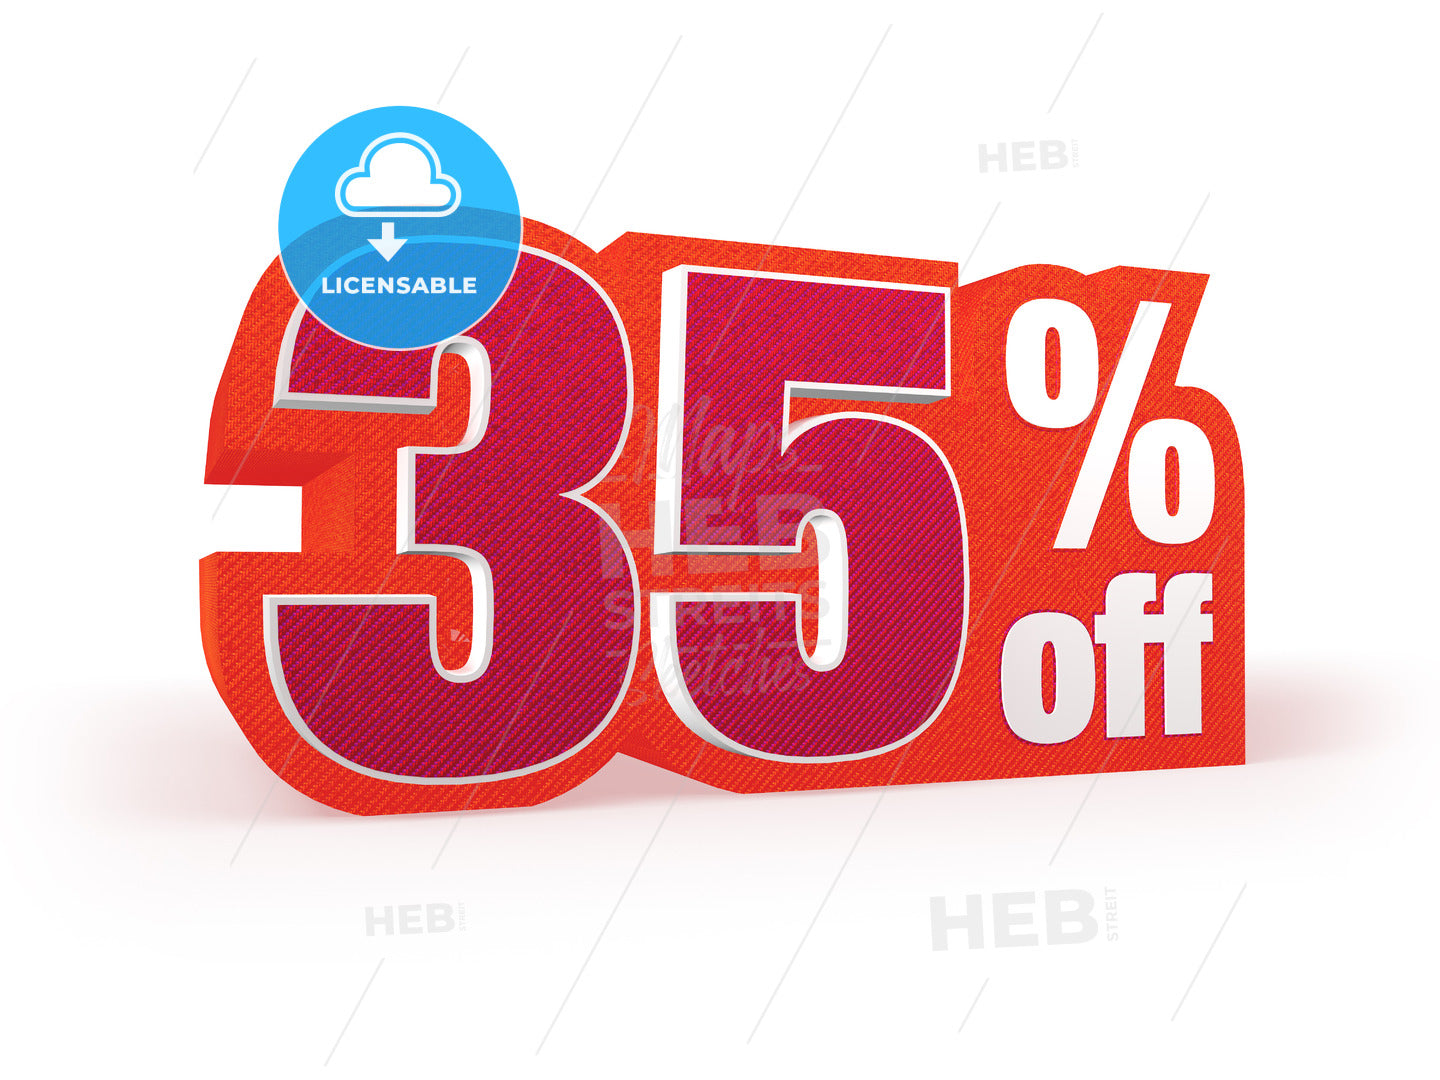 35 percent off red wool styled discount price sign – instant download